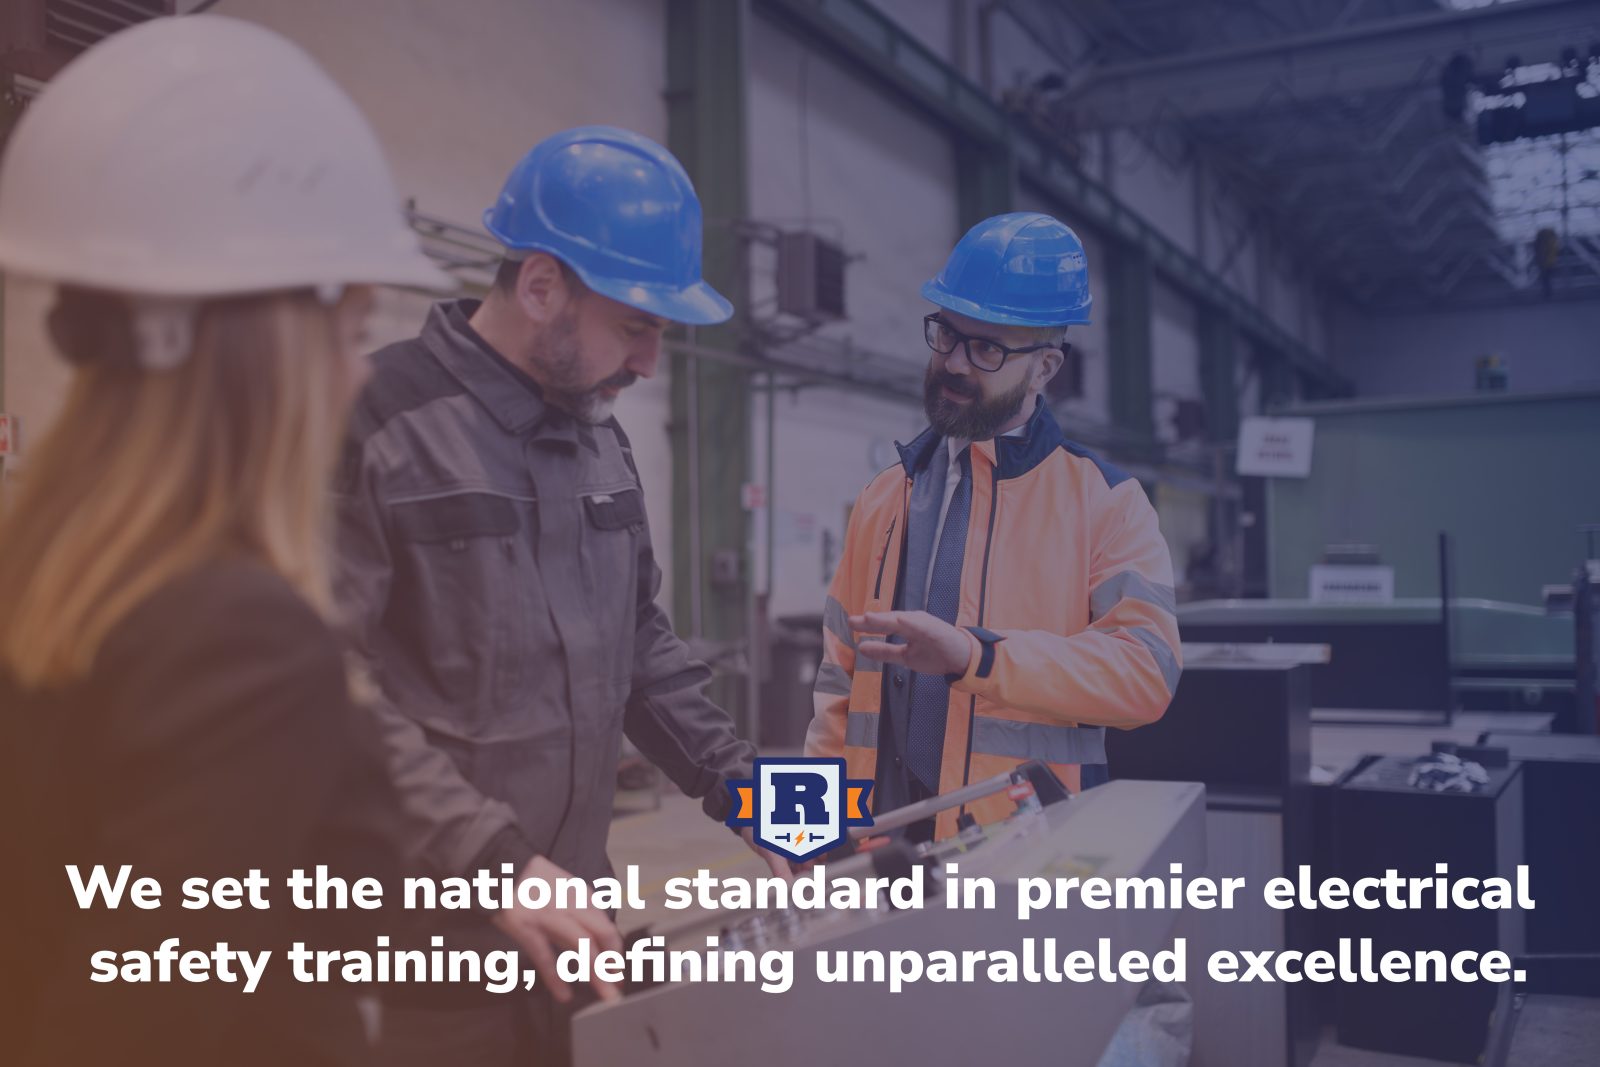 We set the national standard in premier electrical safety training, defining unparalleled excellence.